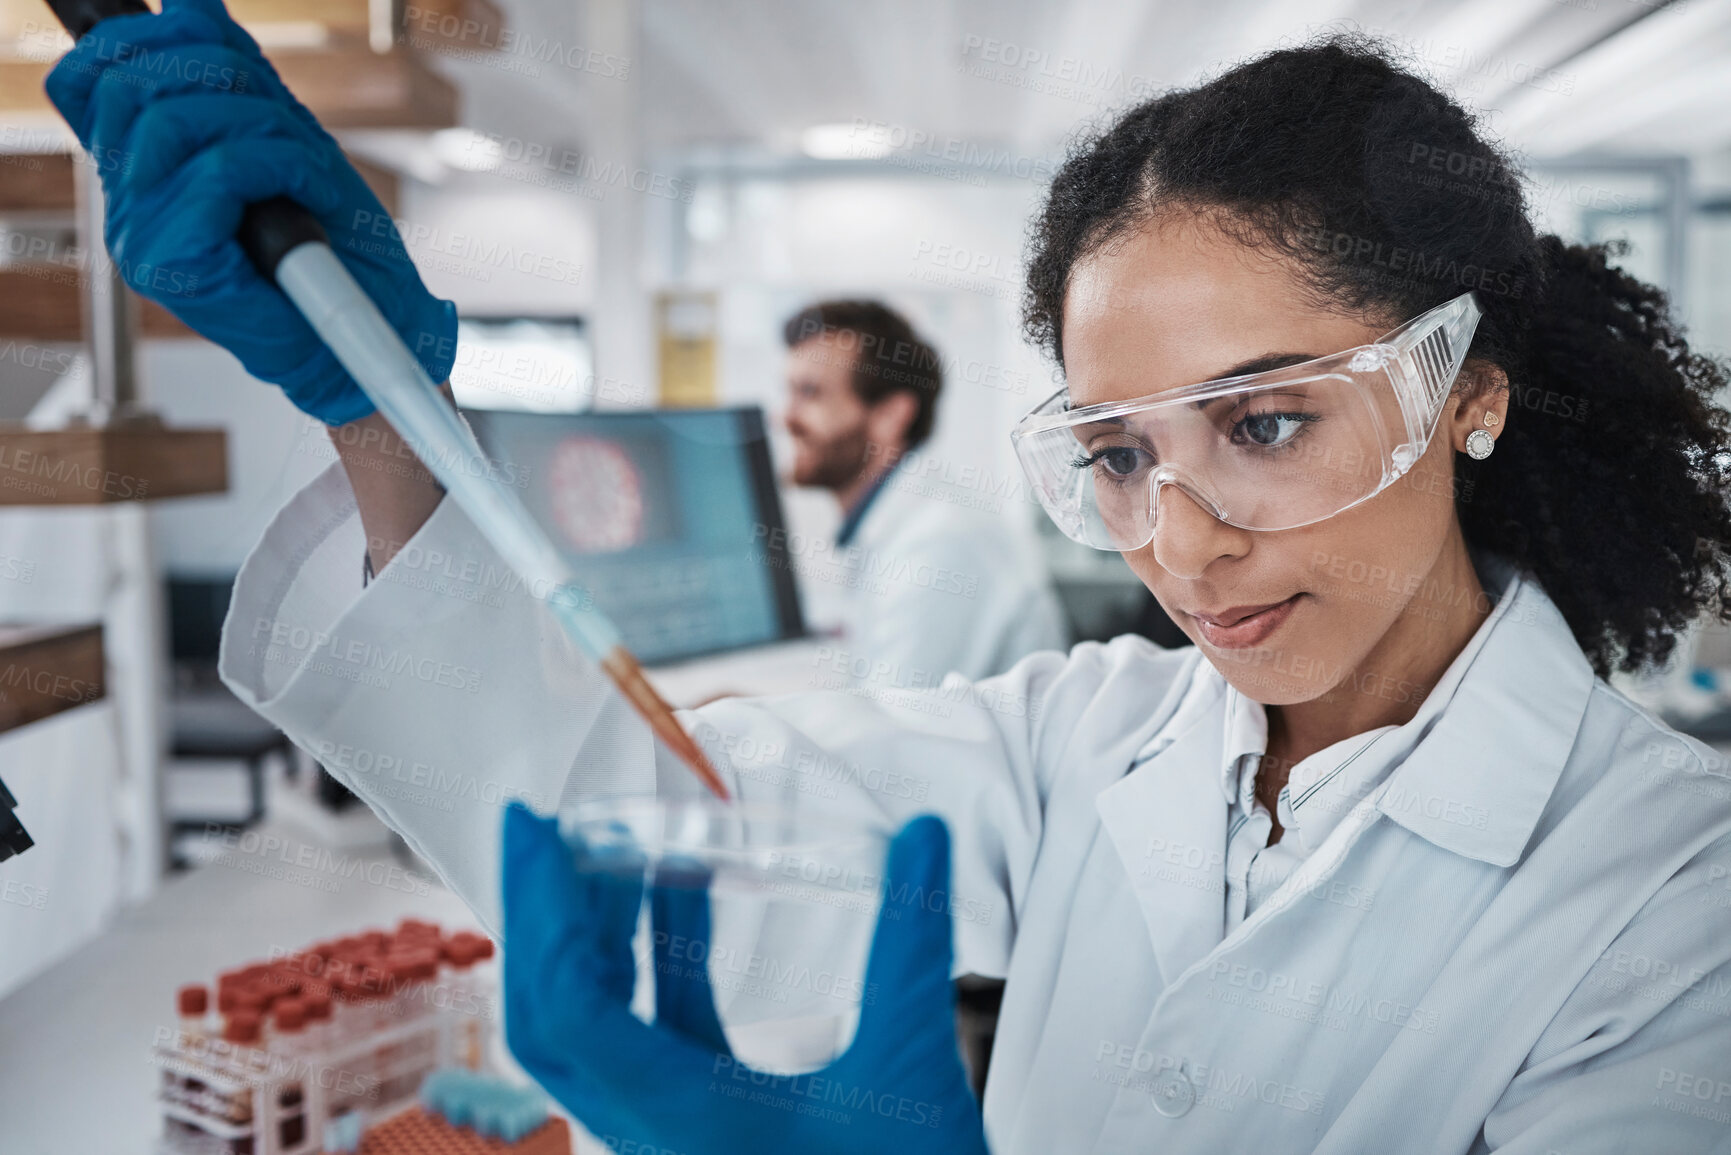 Buy stock photo Scientist, pipette or petri dish in laboratory research, medical pharmacy or dna blood engineering. Black woman, dropper or science equipment in healthcare analytics test or future vaccine innovation